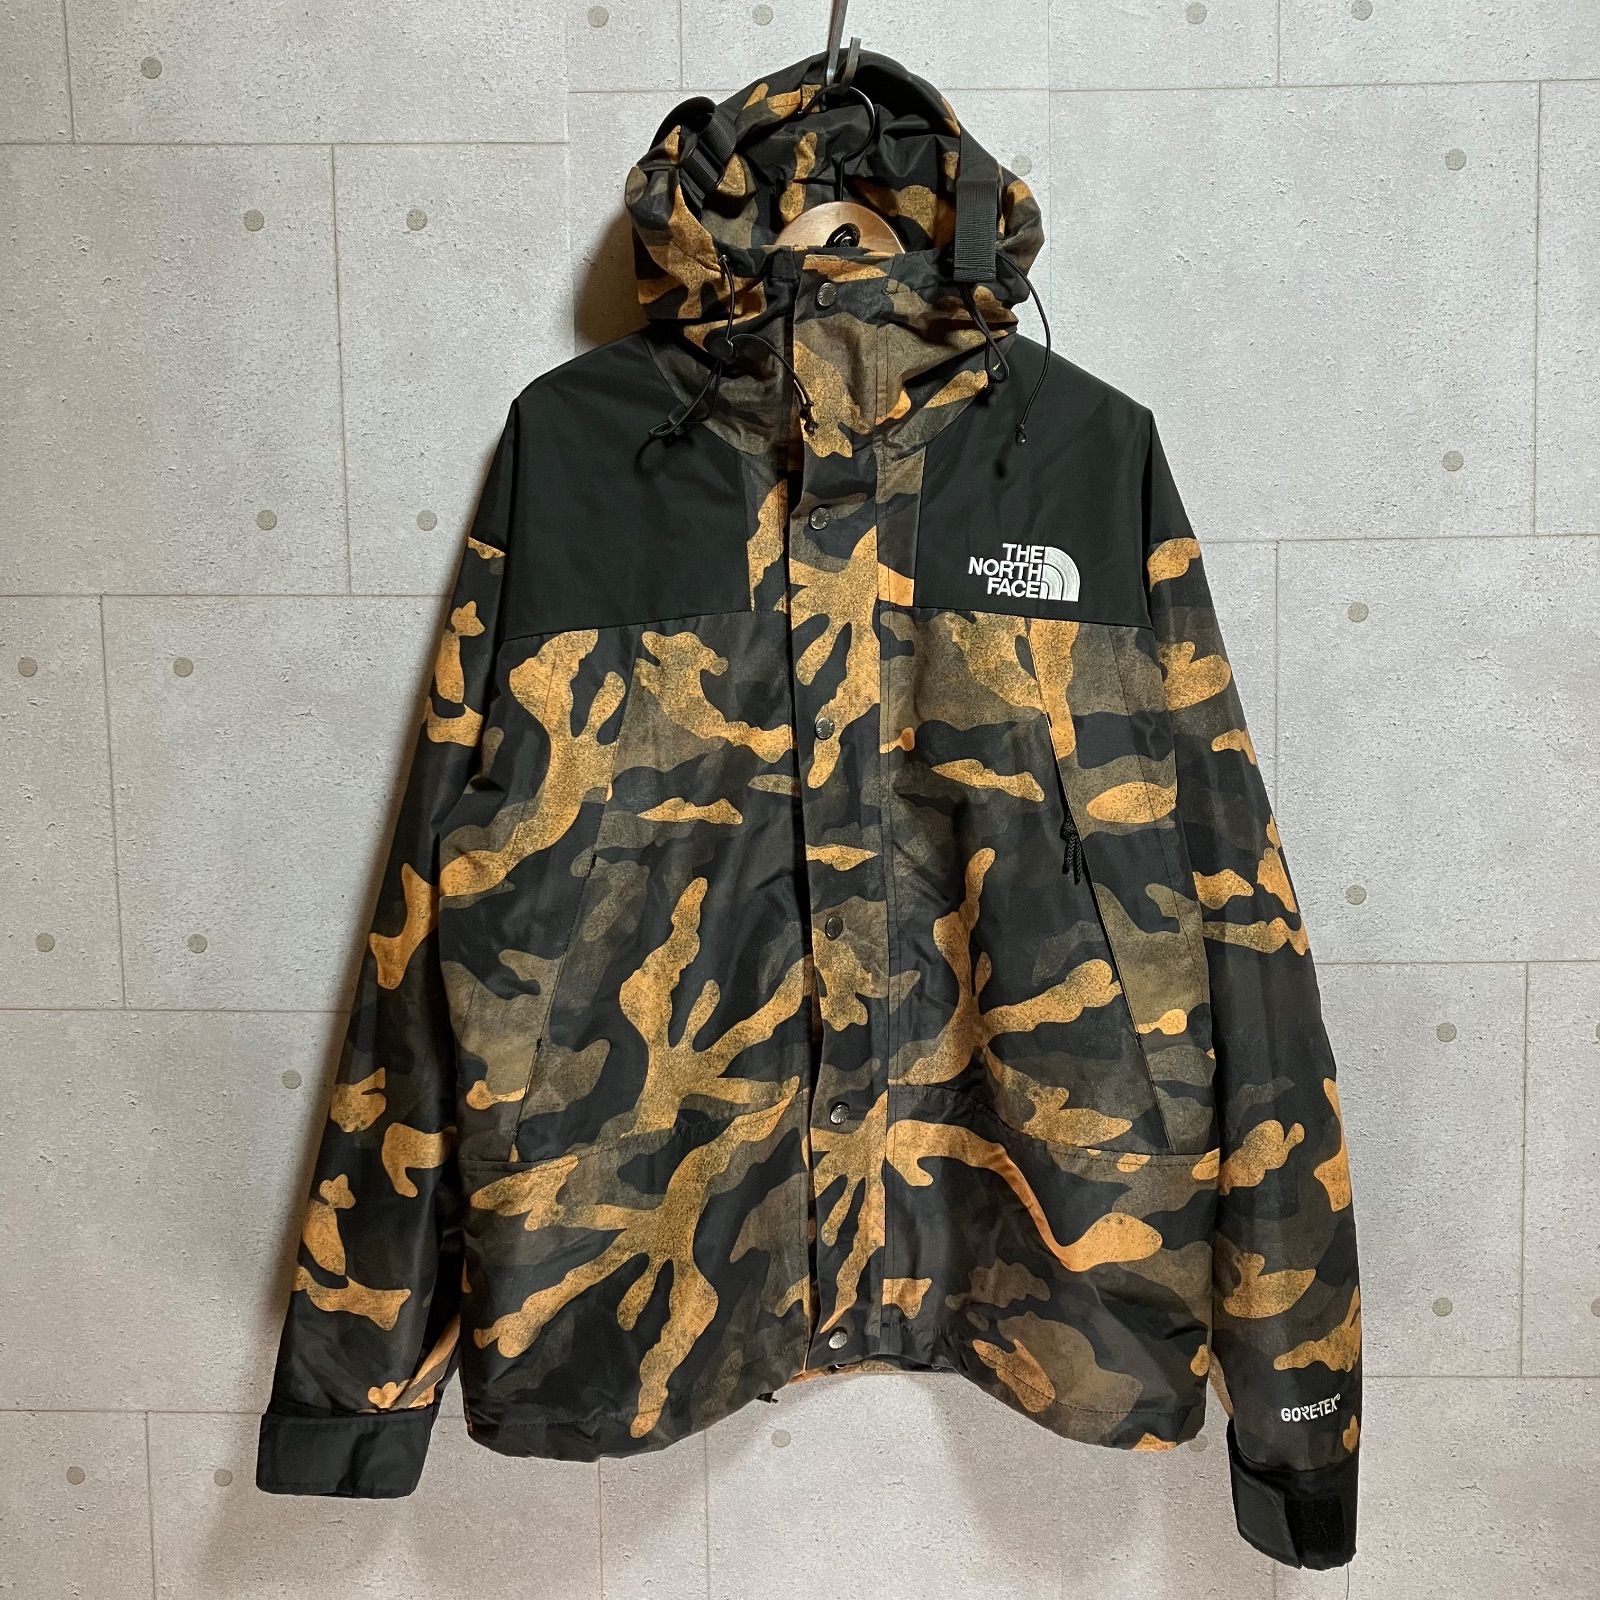 THE NORTH FACE 1990 MOUNTAIN JACKET GORE-TEX US限 NF0A3XCO ノース 